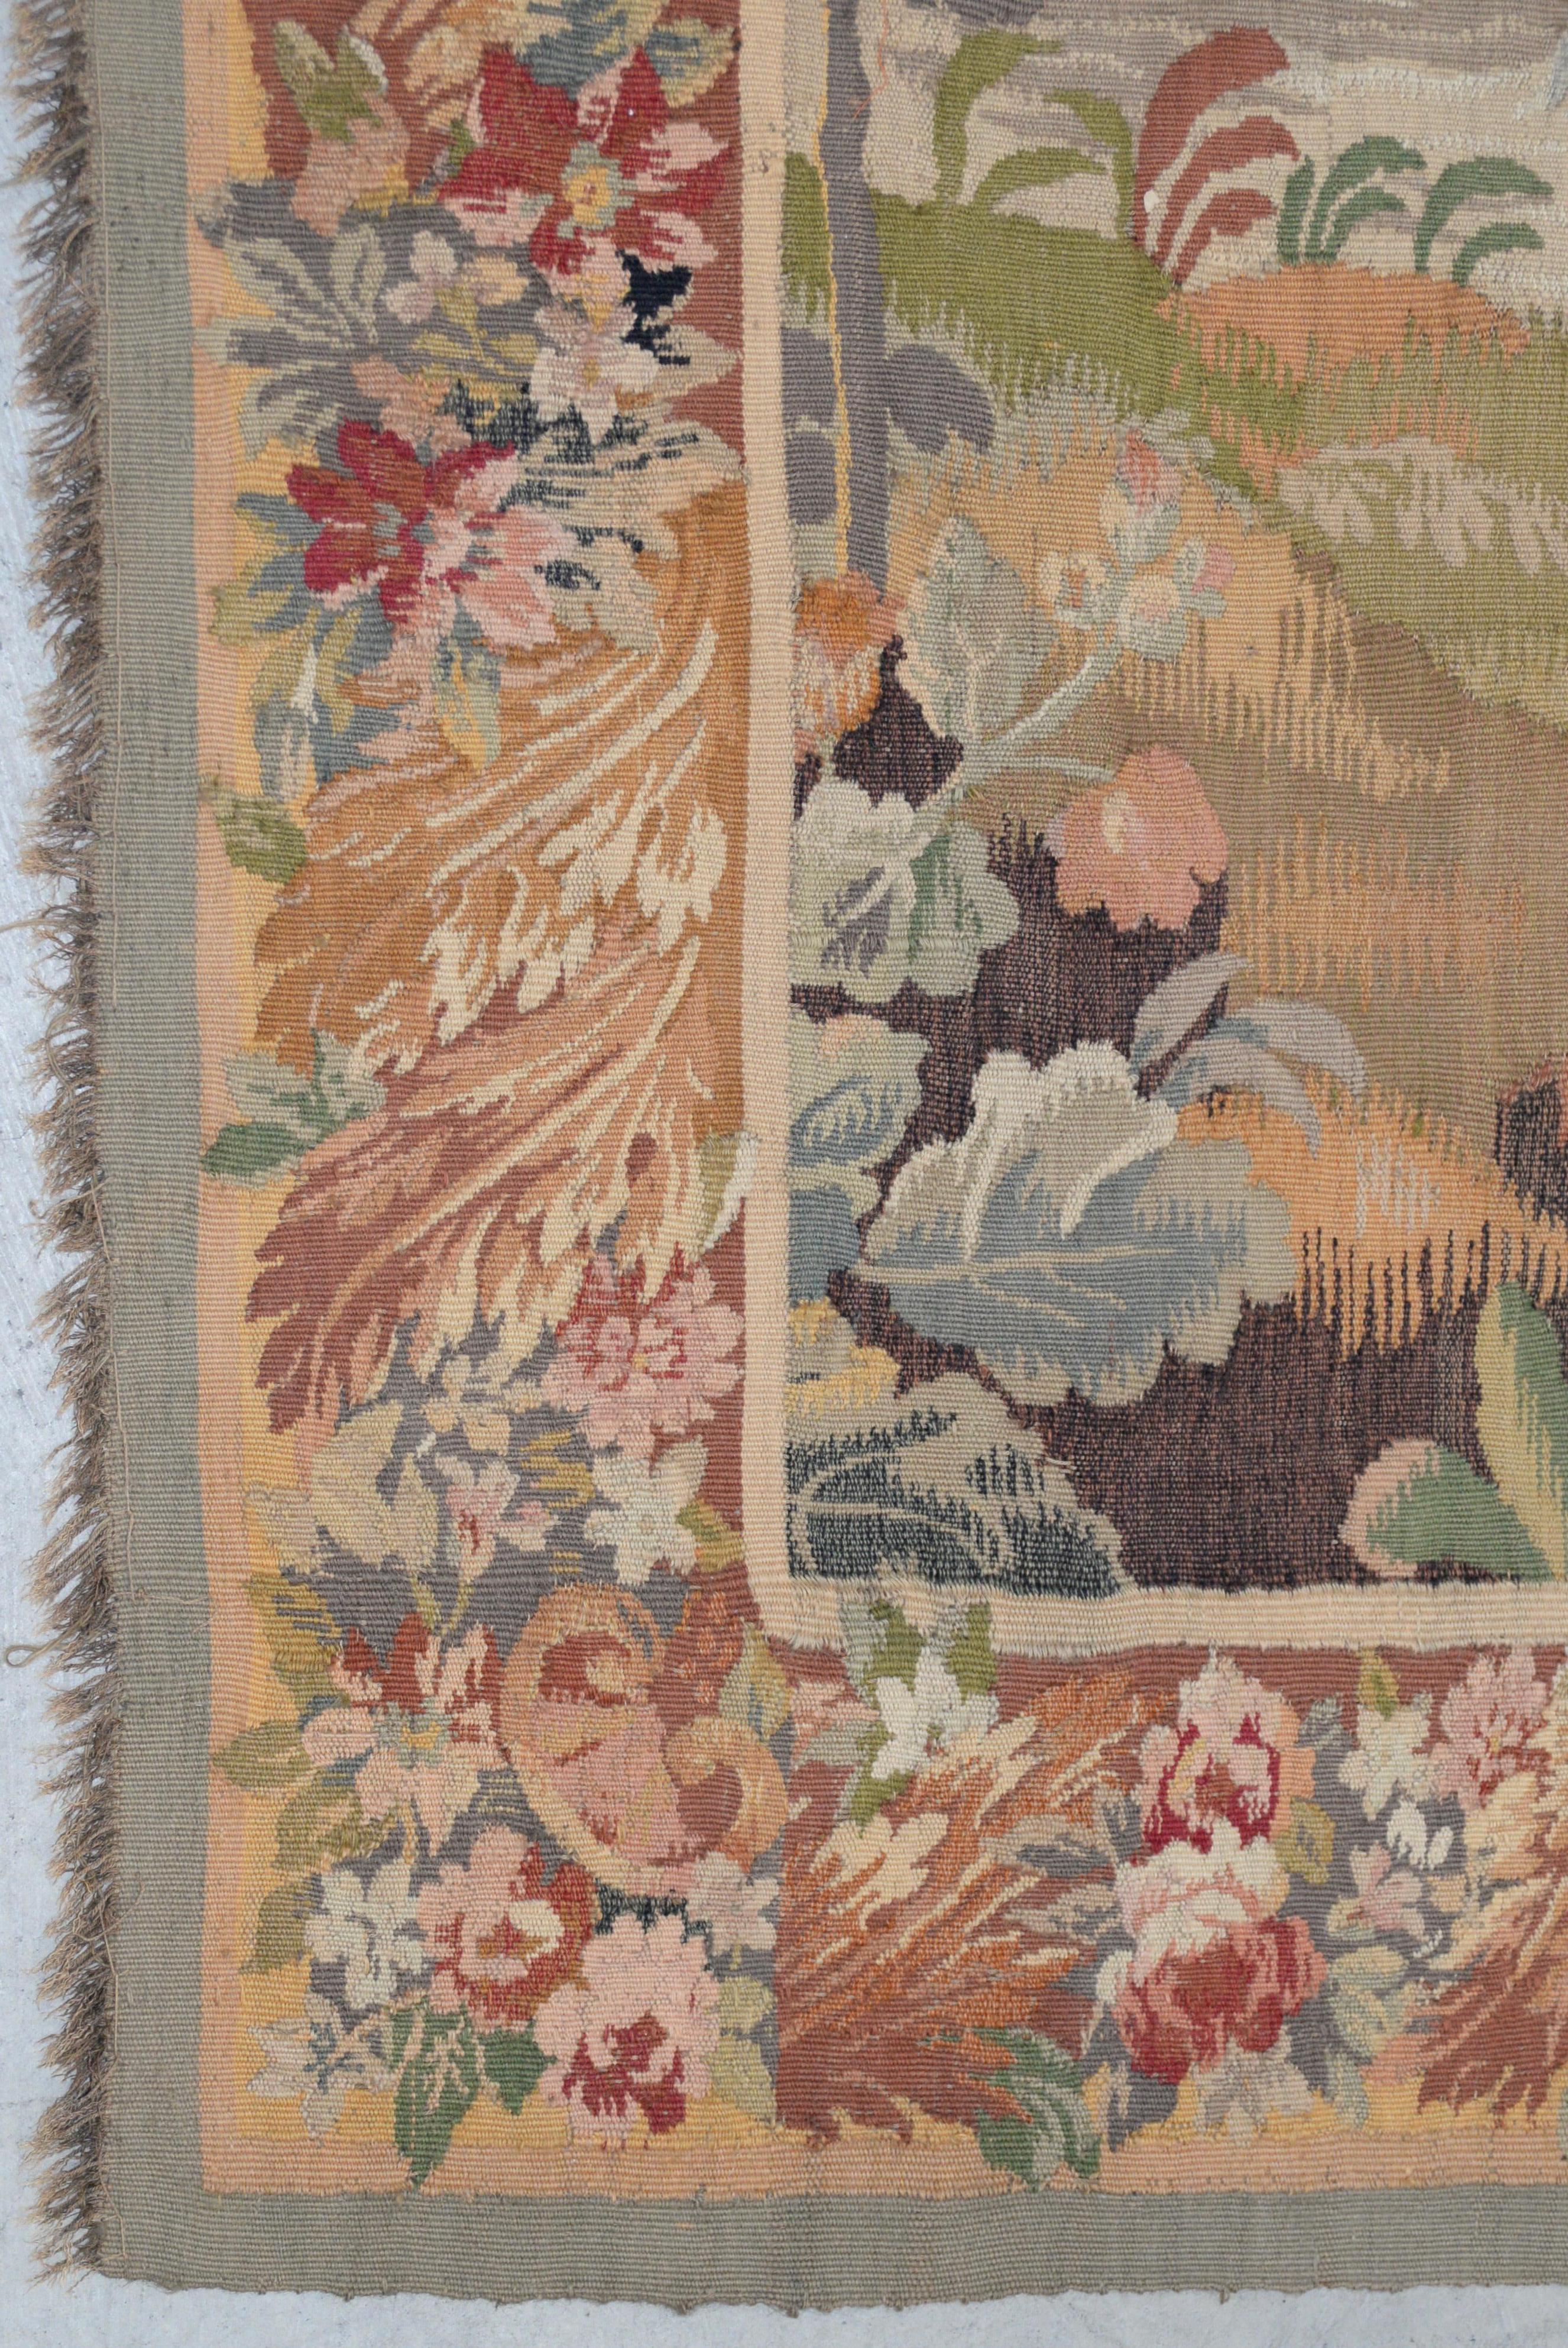 Hand-Woven Fine Antique European Tapestry Depicting a Country Scene with Dogs